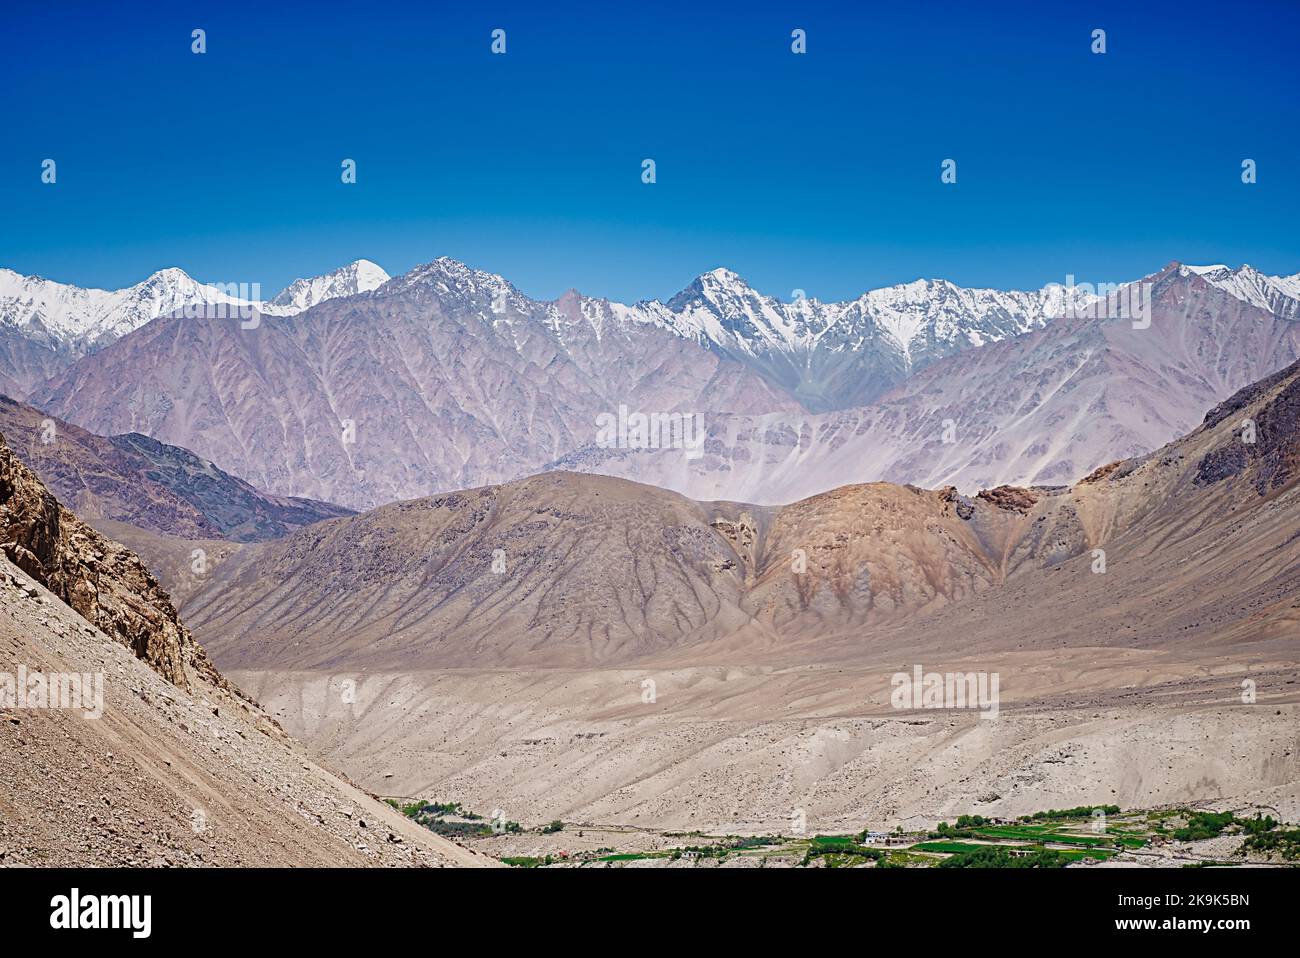 Wide vista view of barren mountains and Leh Valley seen from Khardung la at 18000 feet altitude with the Saser Kangri Peaks. Stock Photo